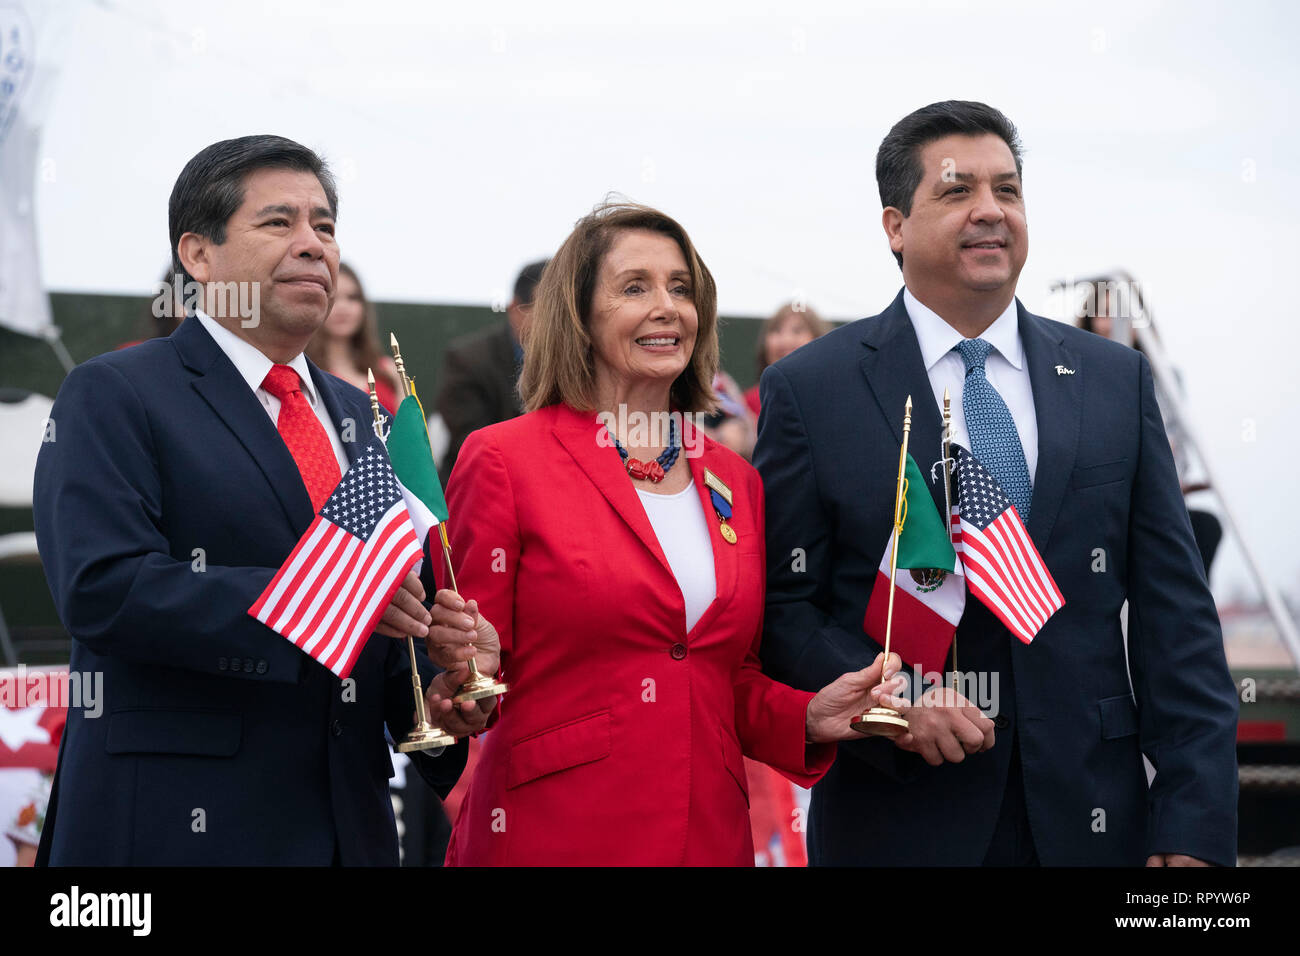 United States House of Representatives Speaker Nancy Pelosi, with National Institute of Migration commissioner Dr. Tonatiuh Guillen Lopez (red tie) and Francisco Javier Garcia Cabeza de Vaca (blue tie), governor of the Mexican state of Tamaulipas, participate in the abrazo (friendship) ceremony on the Juarez Lincoln international bridge between Laredo, Texas, and Nuevo Laredo in Tamaulipas during Laredo's annual Washington's Birthday celebration. Stock Photo